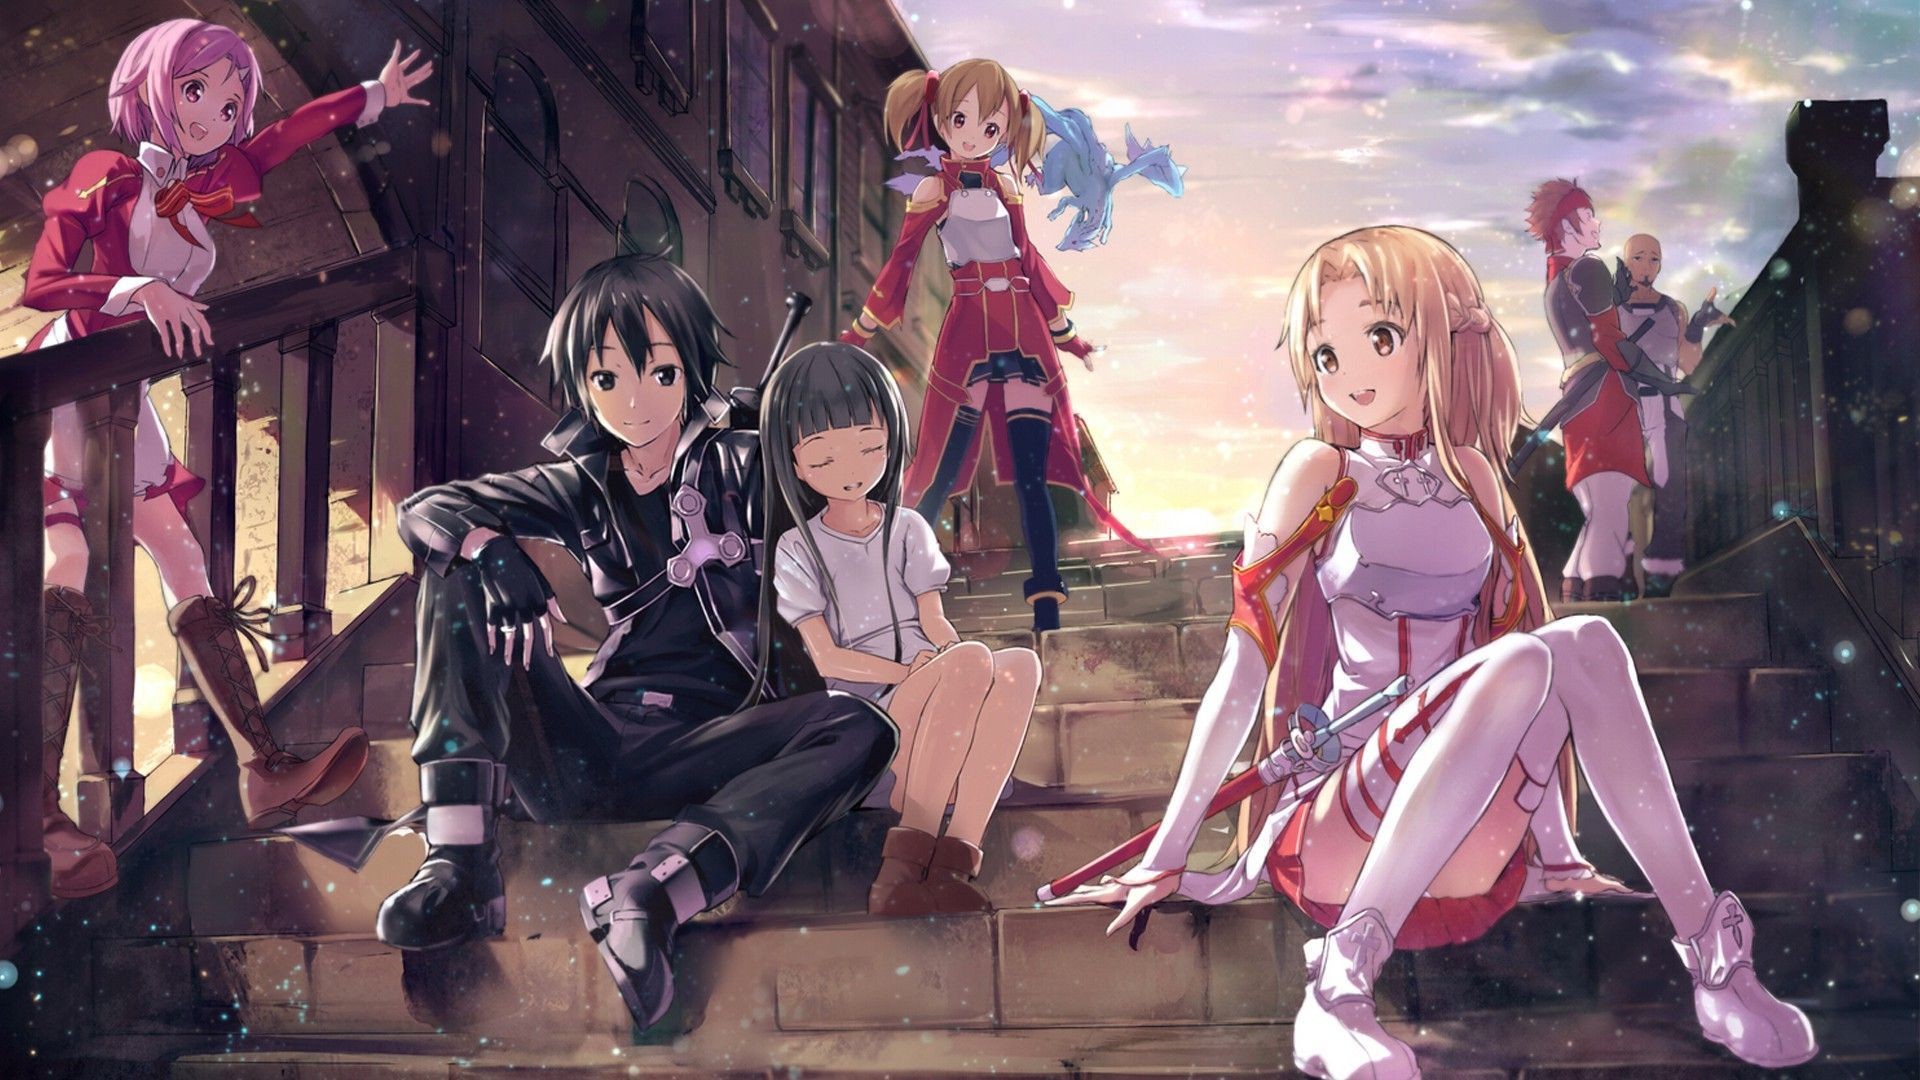 1920x1080 Sword Art Online Wallpapers High Quality | Download Free